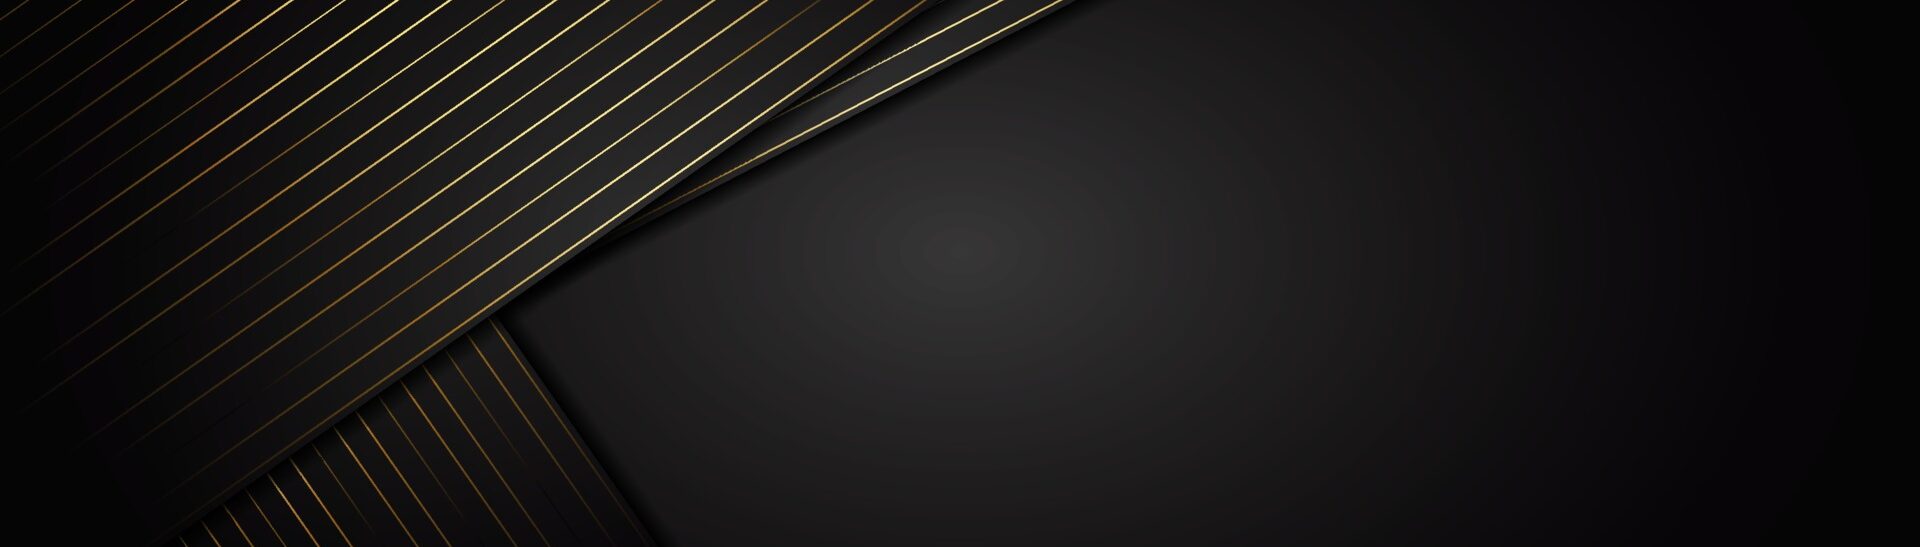 abstract-stripes-golden-lines-diagonal-overlap-on-black-background-luxury-stryle-free-vector